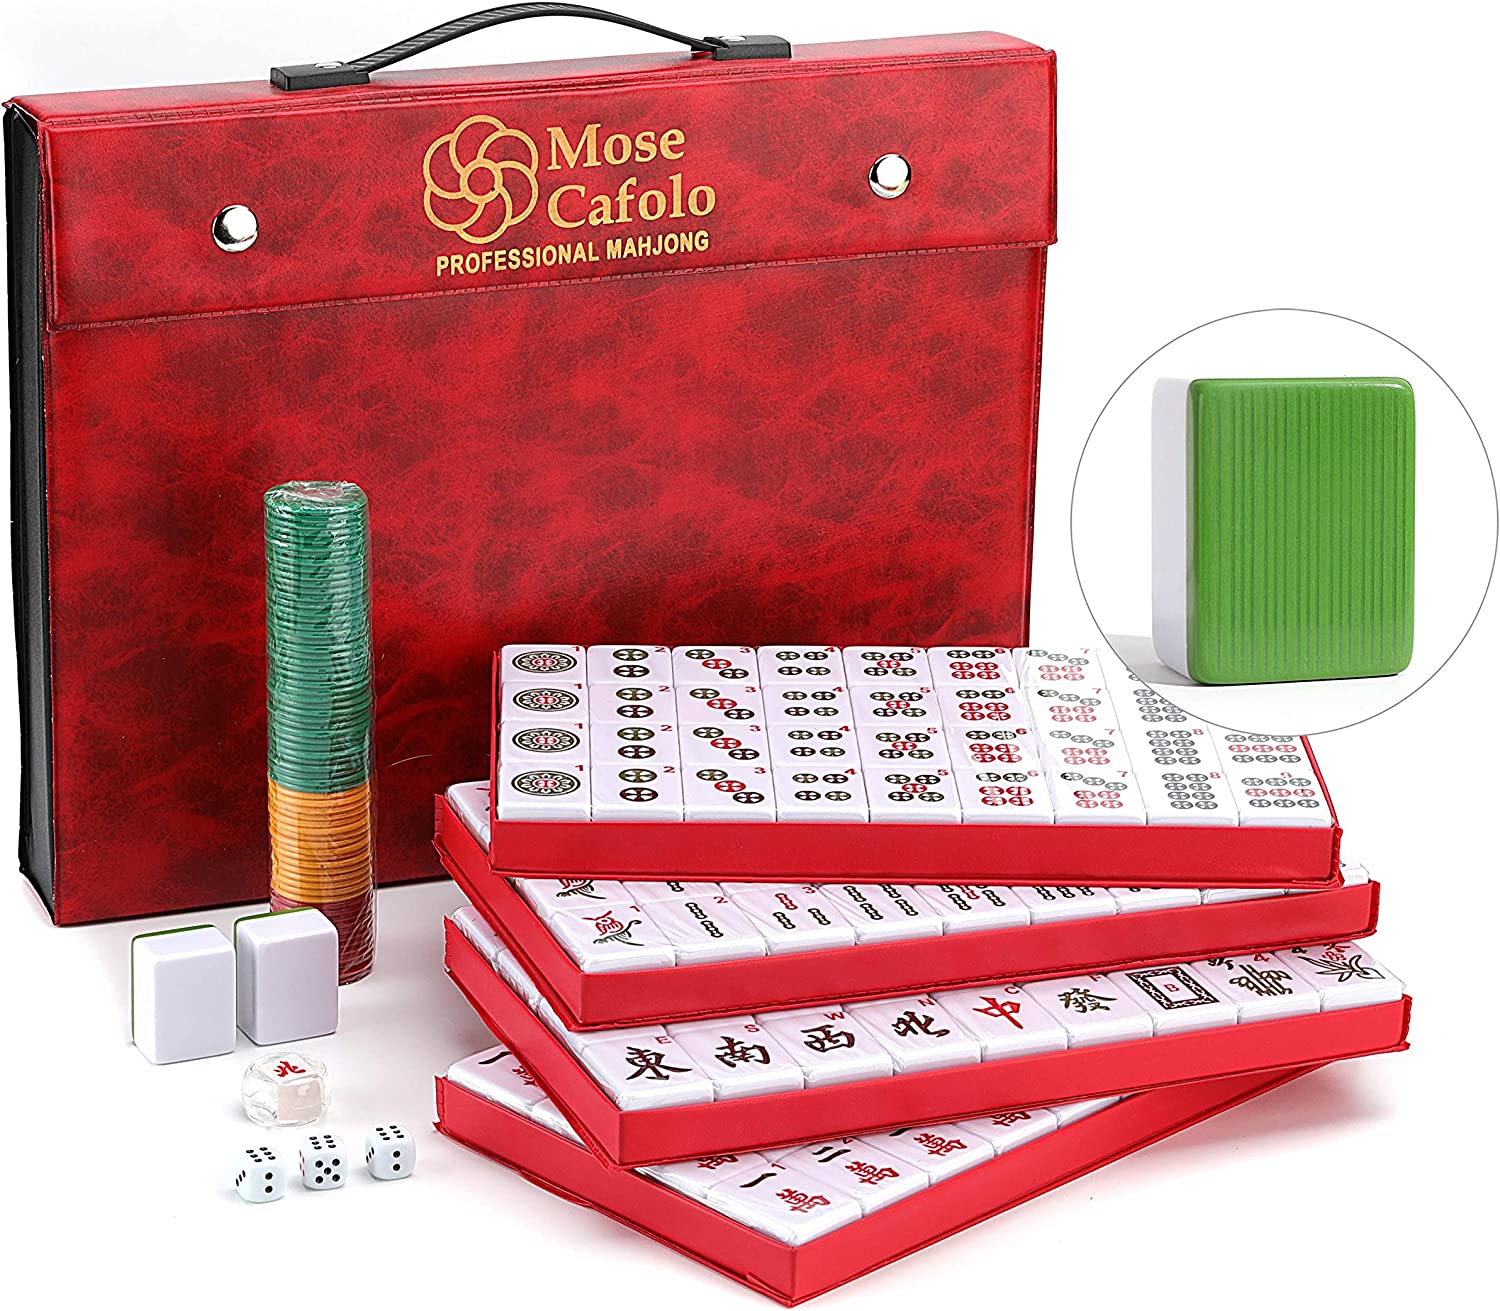 Chinese Mahjong Set X-Large 144 Ivory Color Tile 1.5 Tiles Mah-jongg with  Case